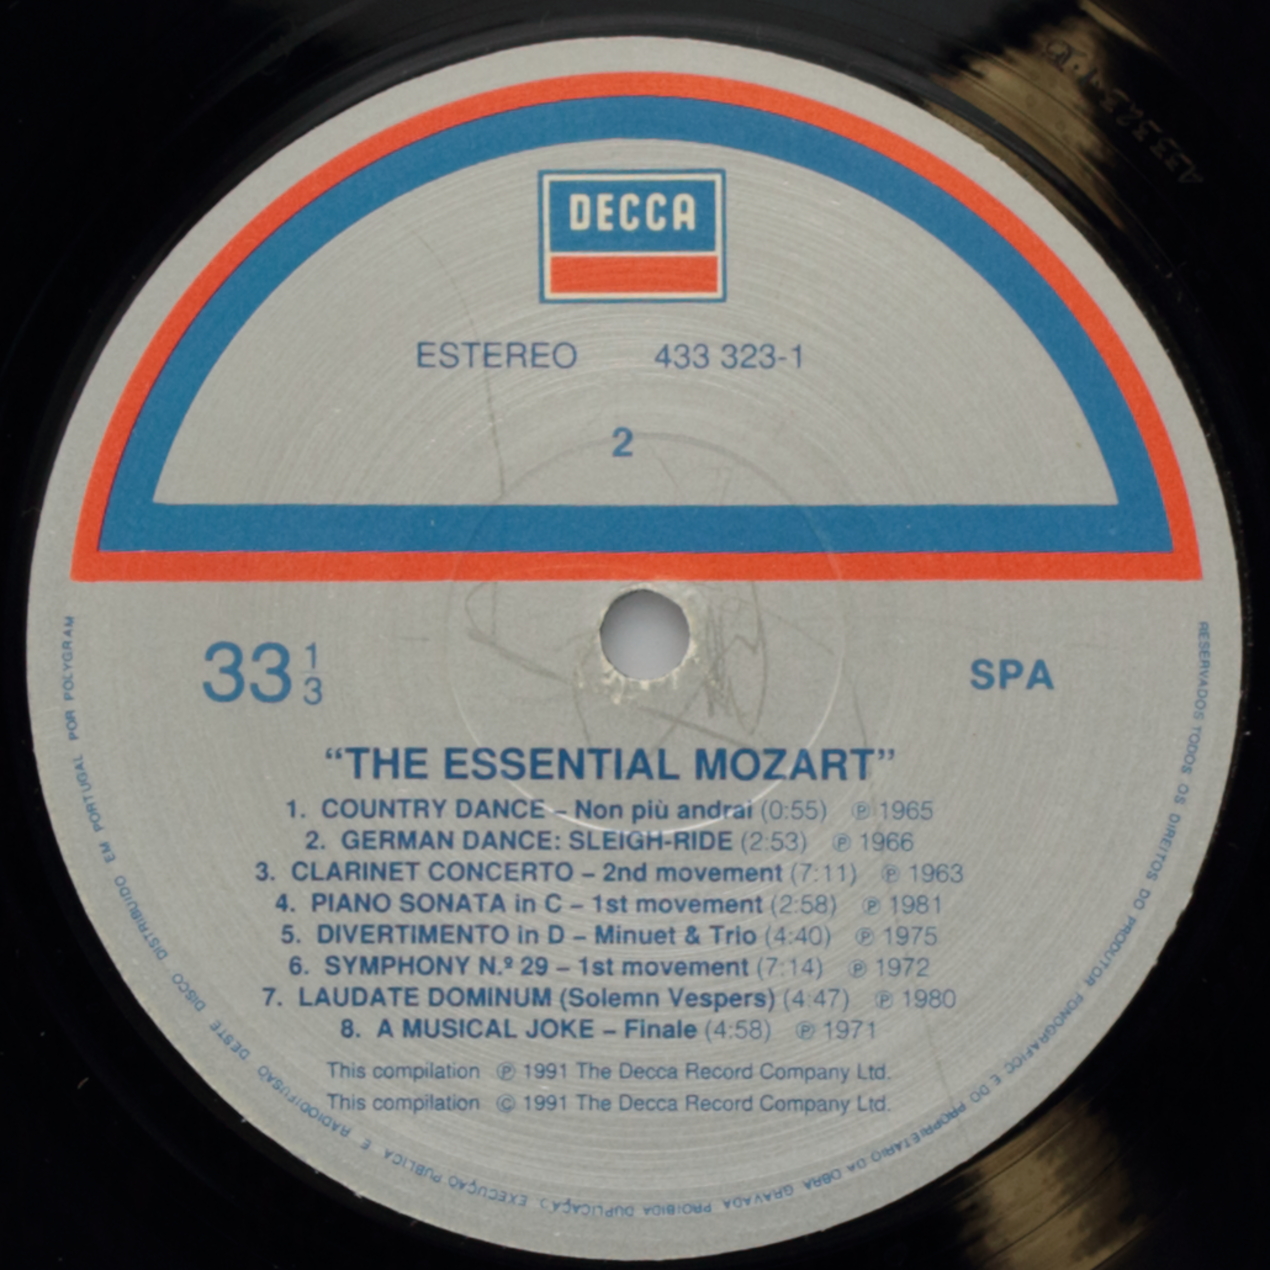 The Essential Mozart - Fifteen of His Most Popular Pieces